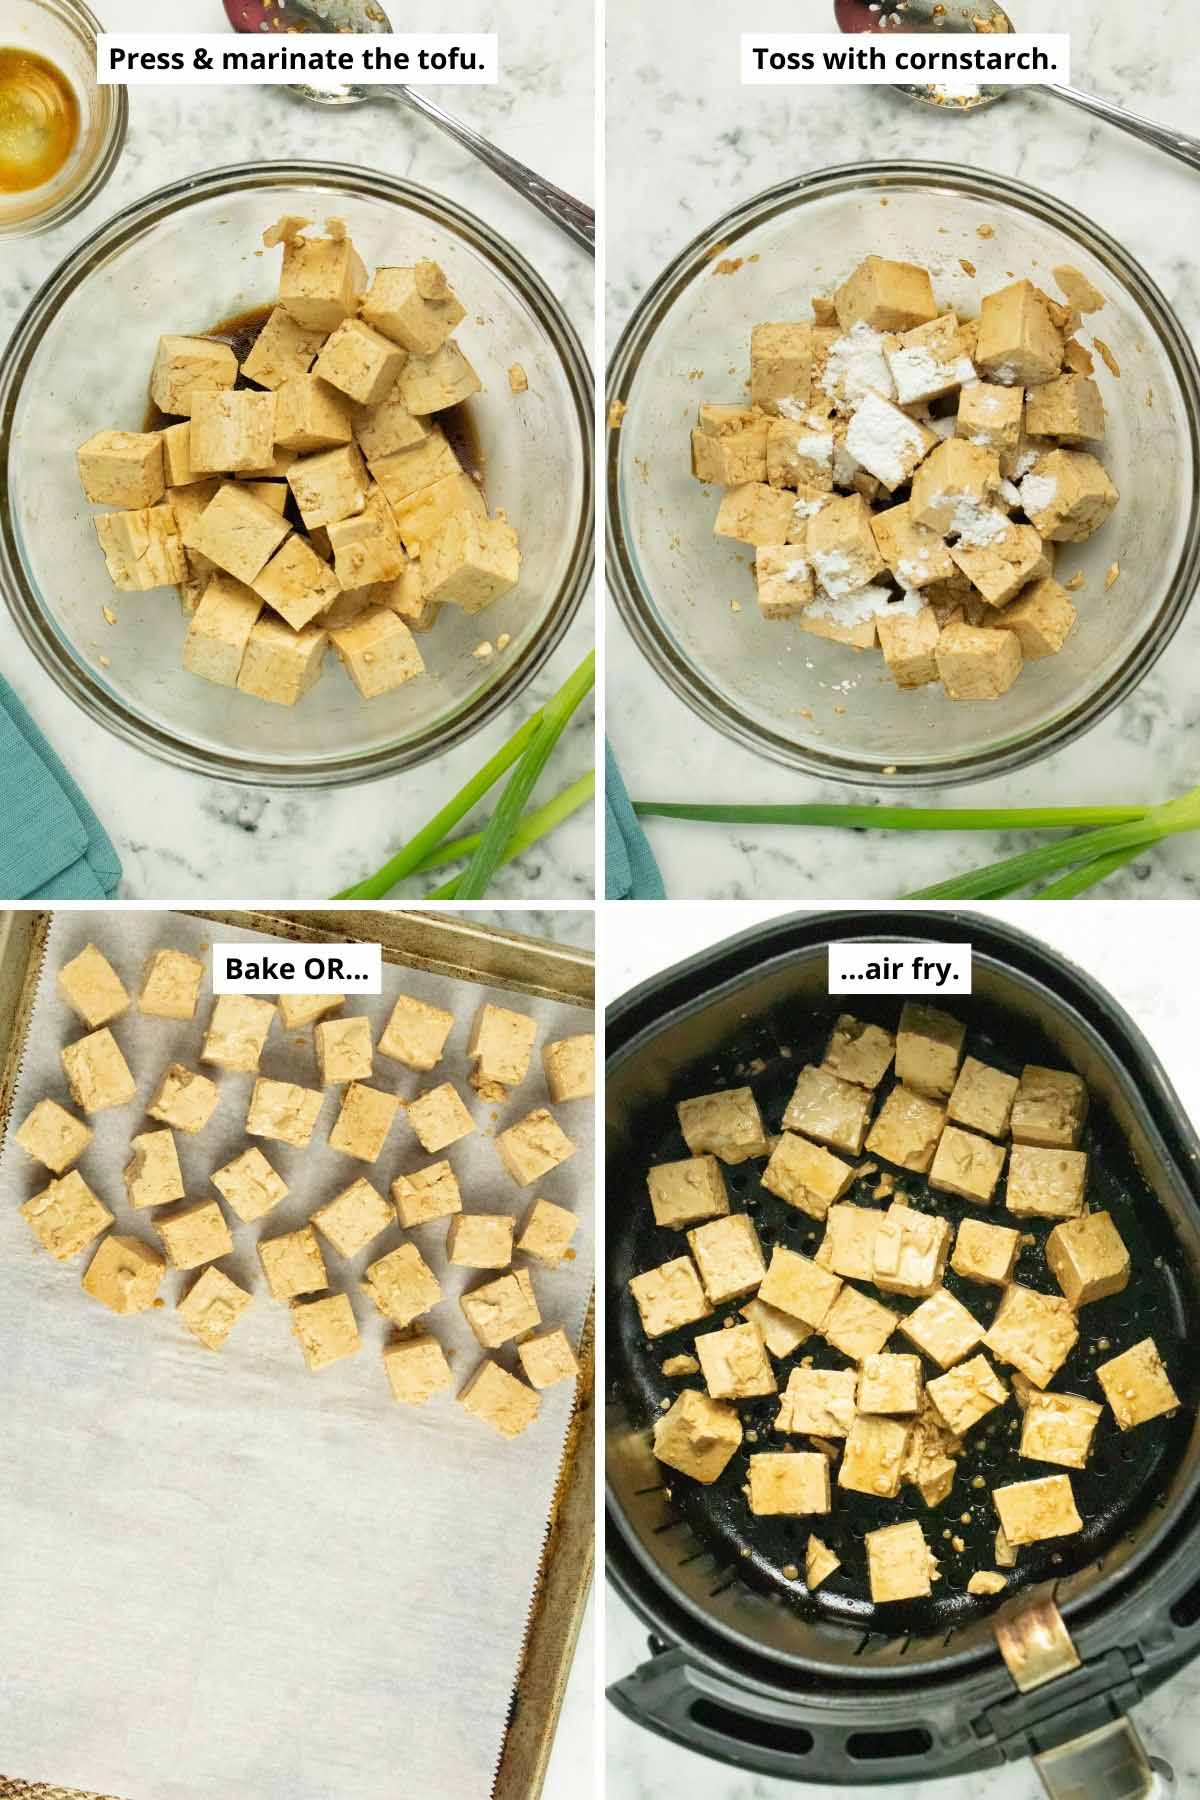 image collage showing the marinated tofu before and after adding cornstarch and the tofu on a baking sheet and in an air fryer basket